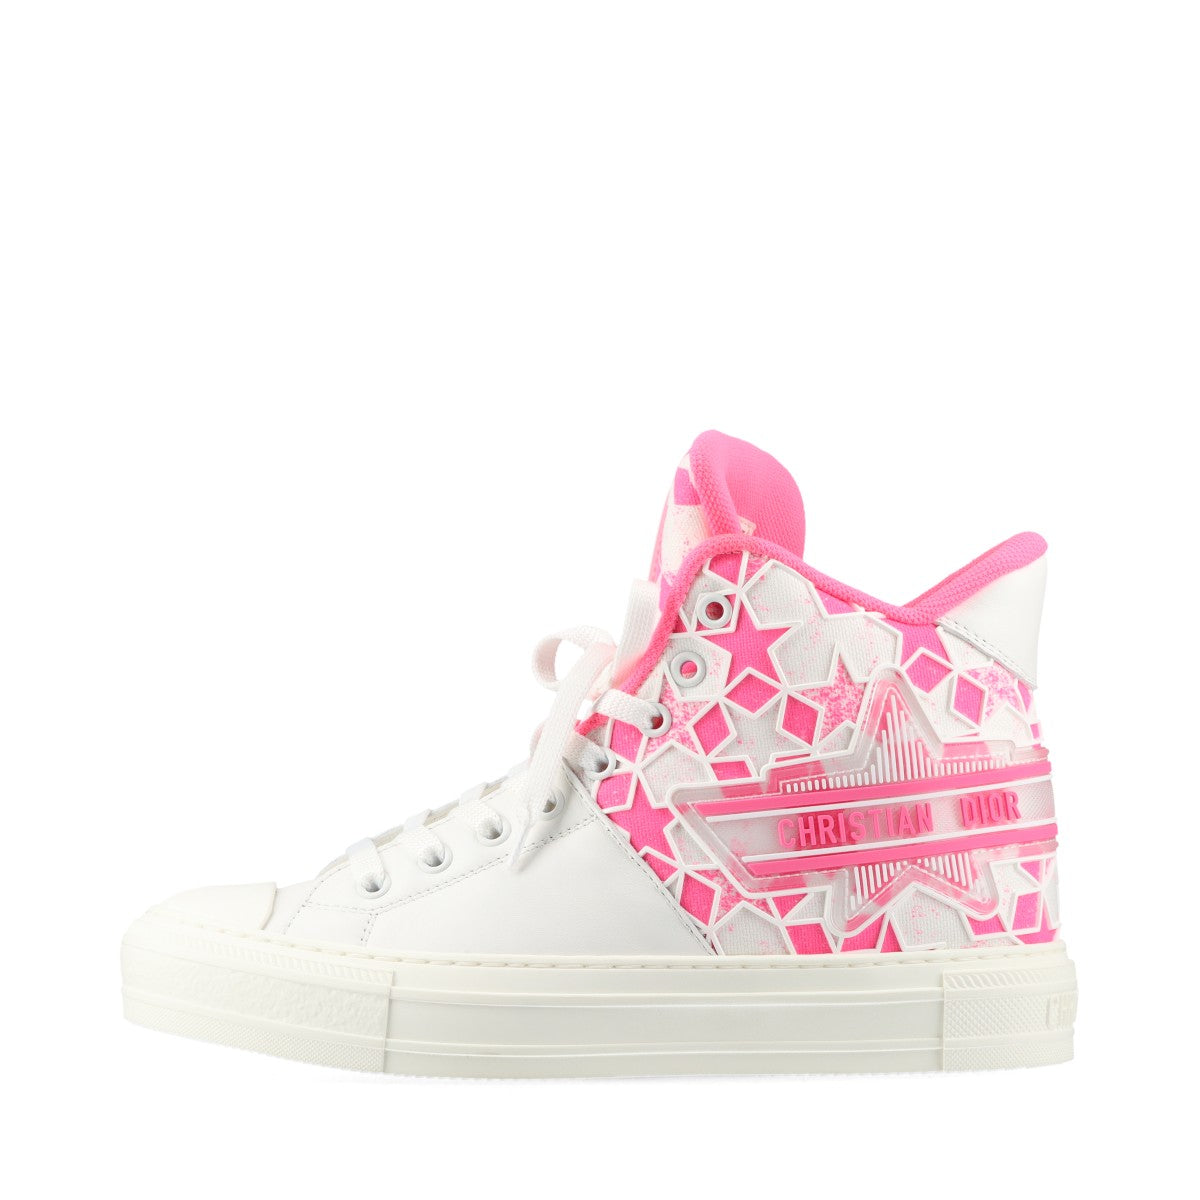 Christian Dior Leather x fabric High-top Sneakers EU37 Ladies' White x pink WALK'N'DIOR STA Star Replacement string box There is a bag